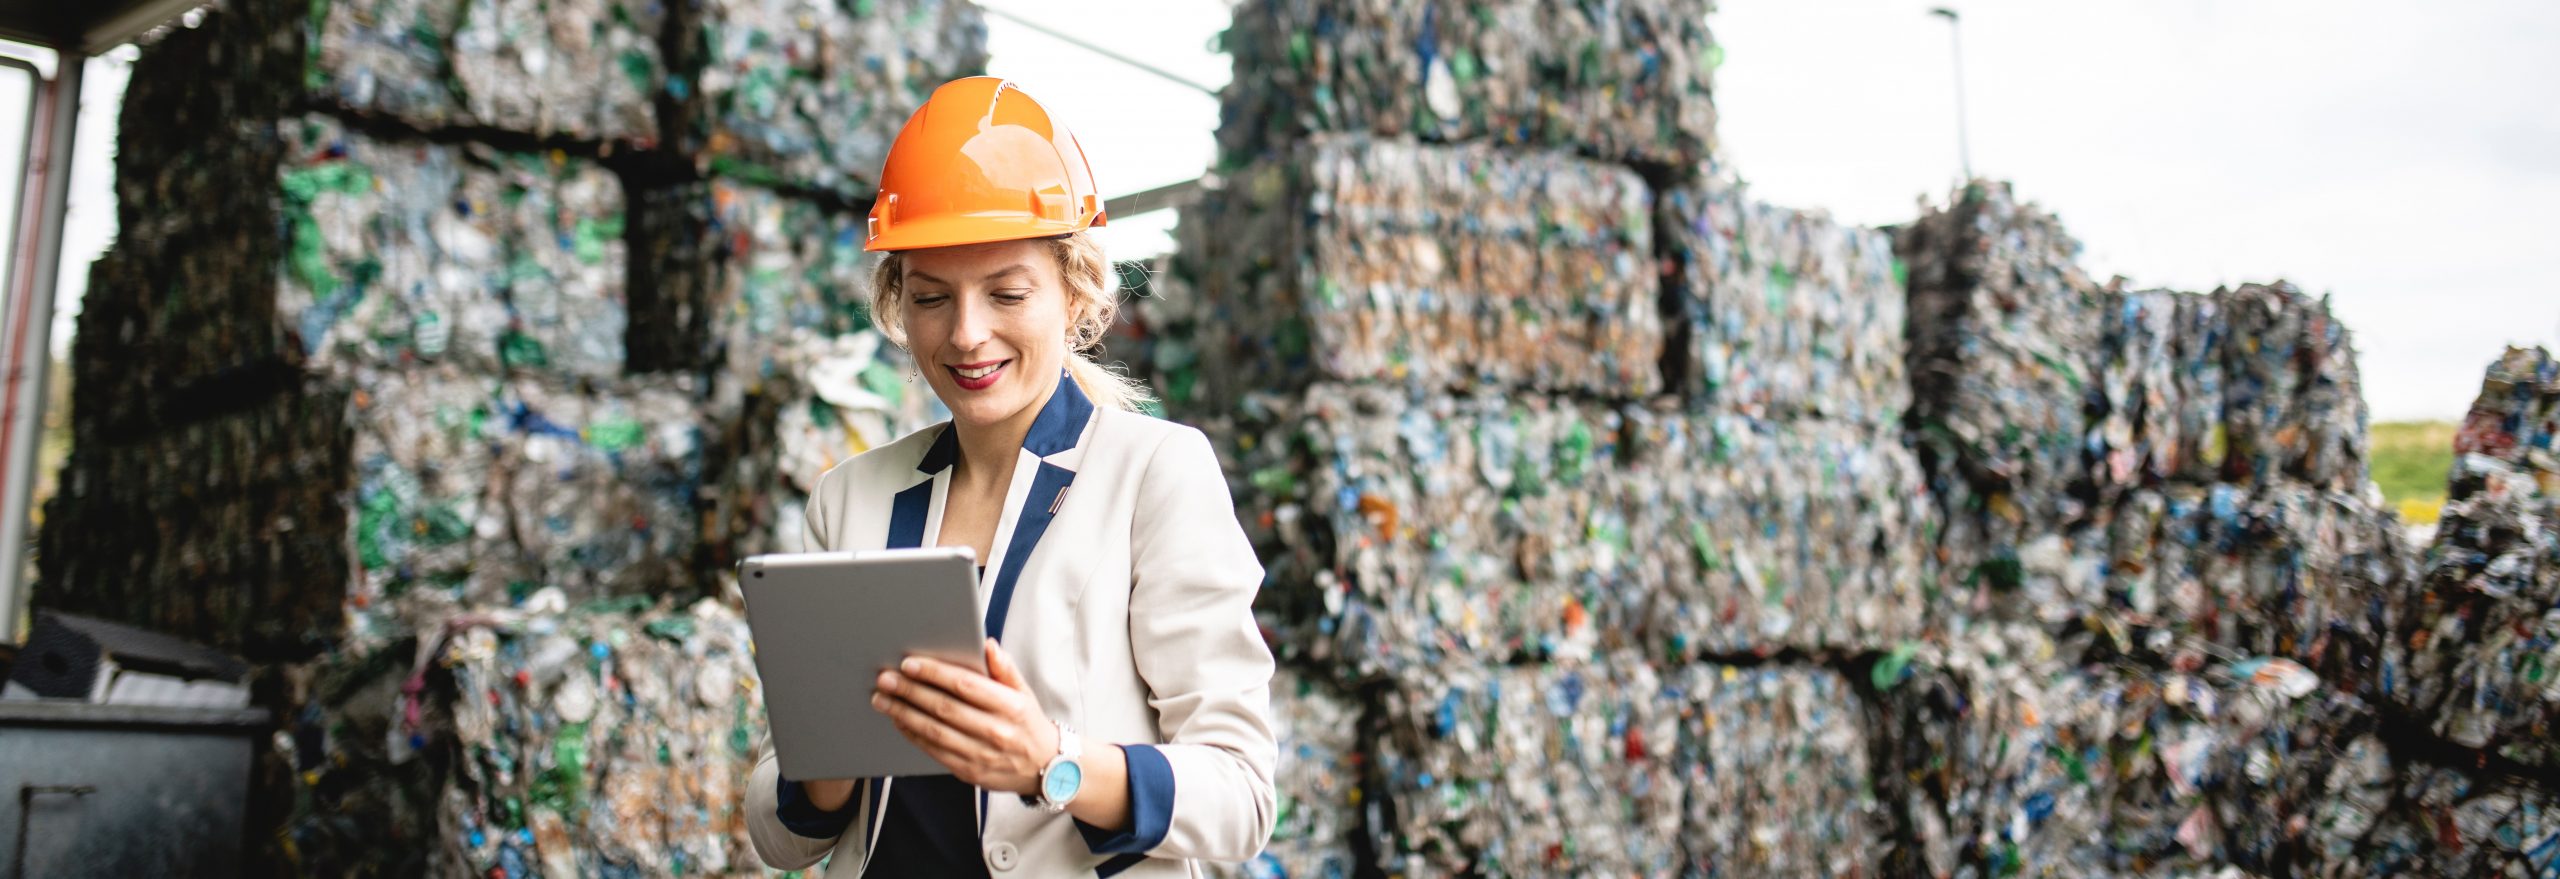 How invisible barcodes can lead to visible improvements in recycling